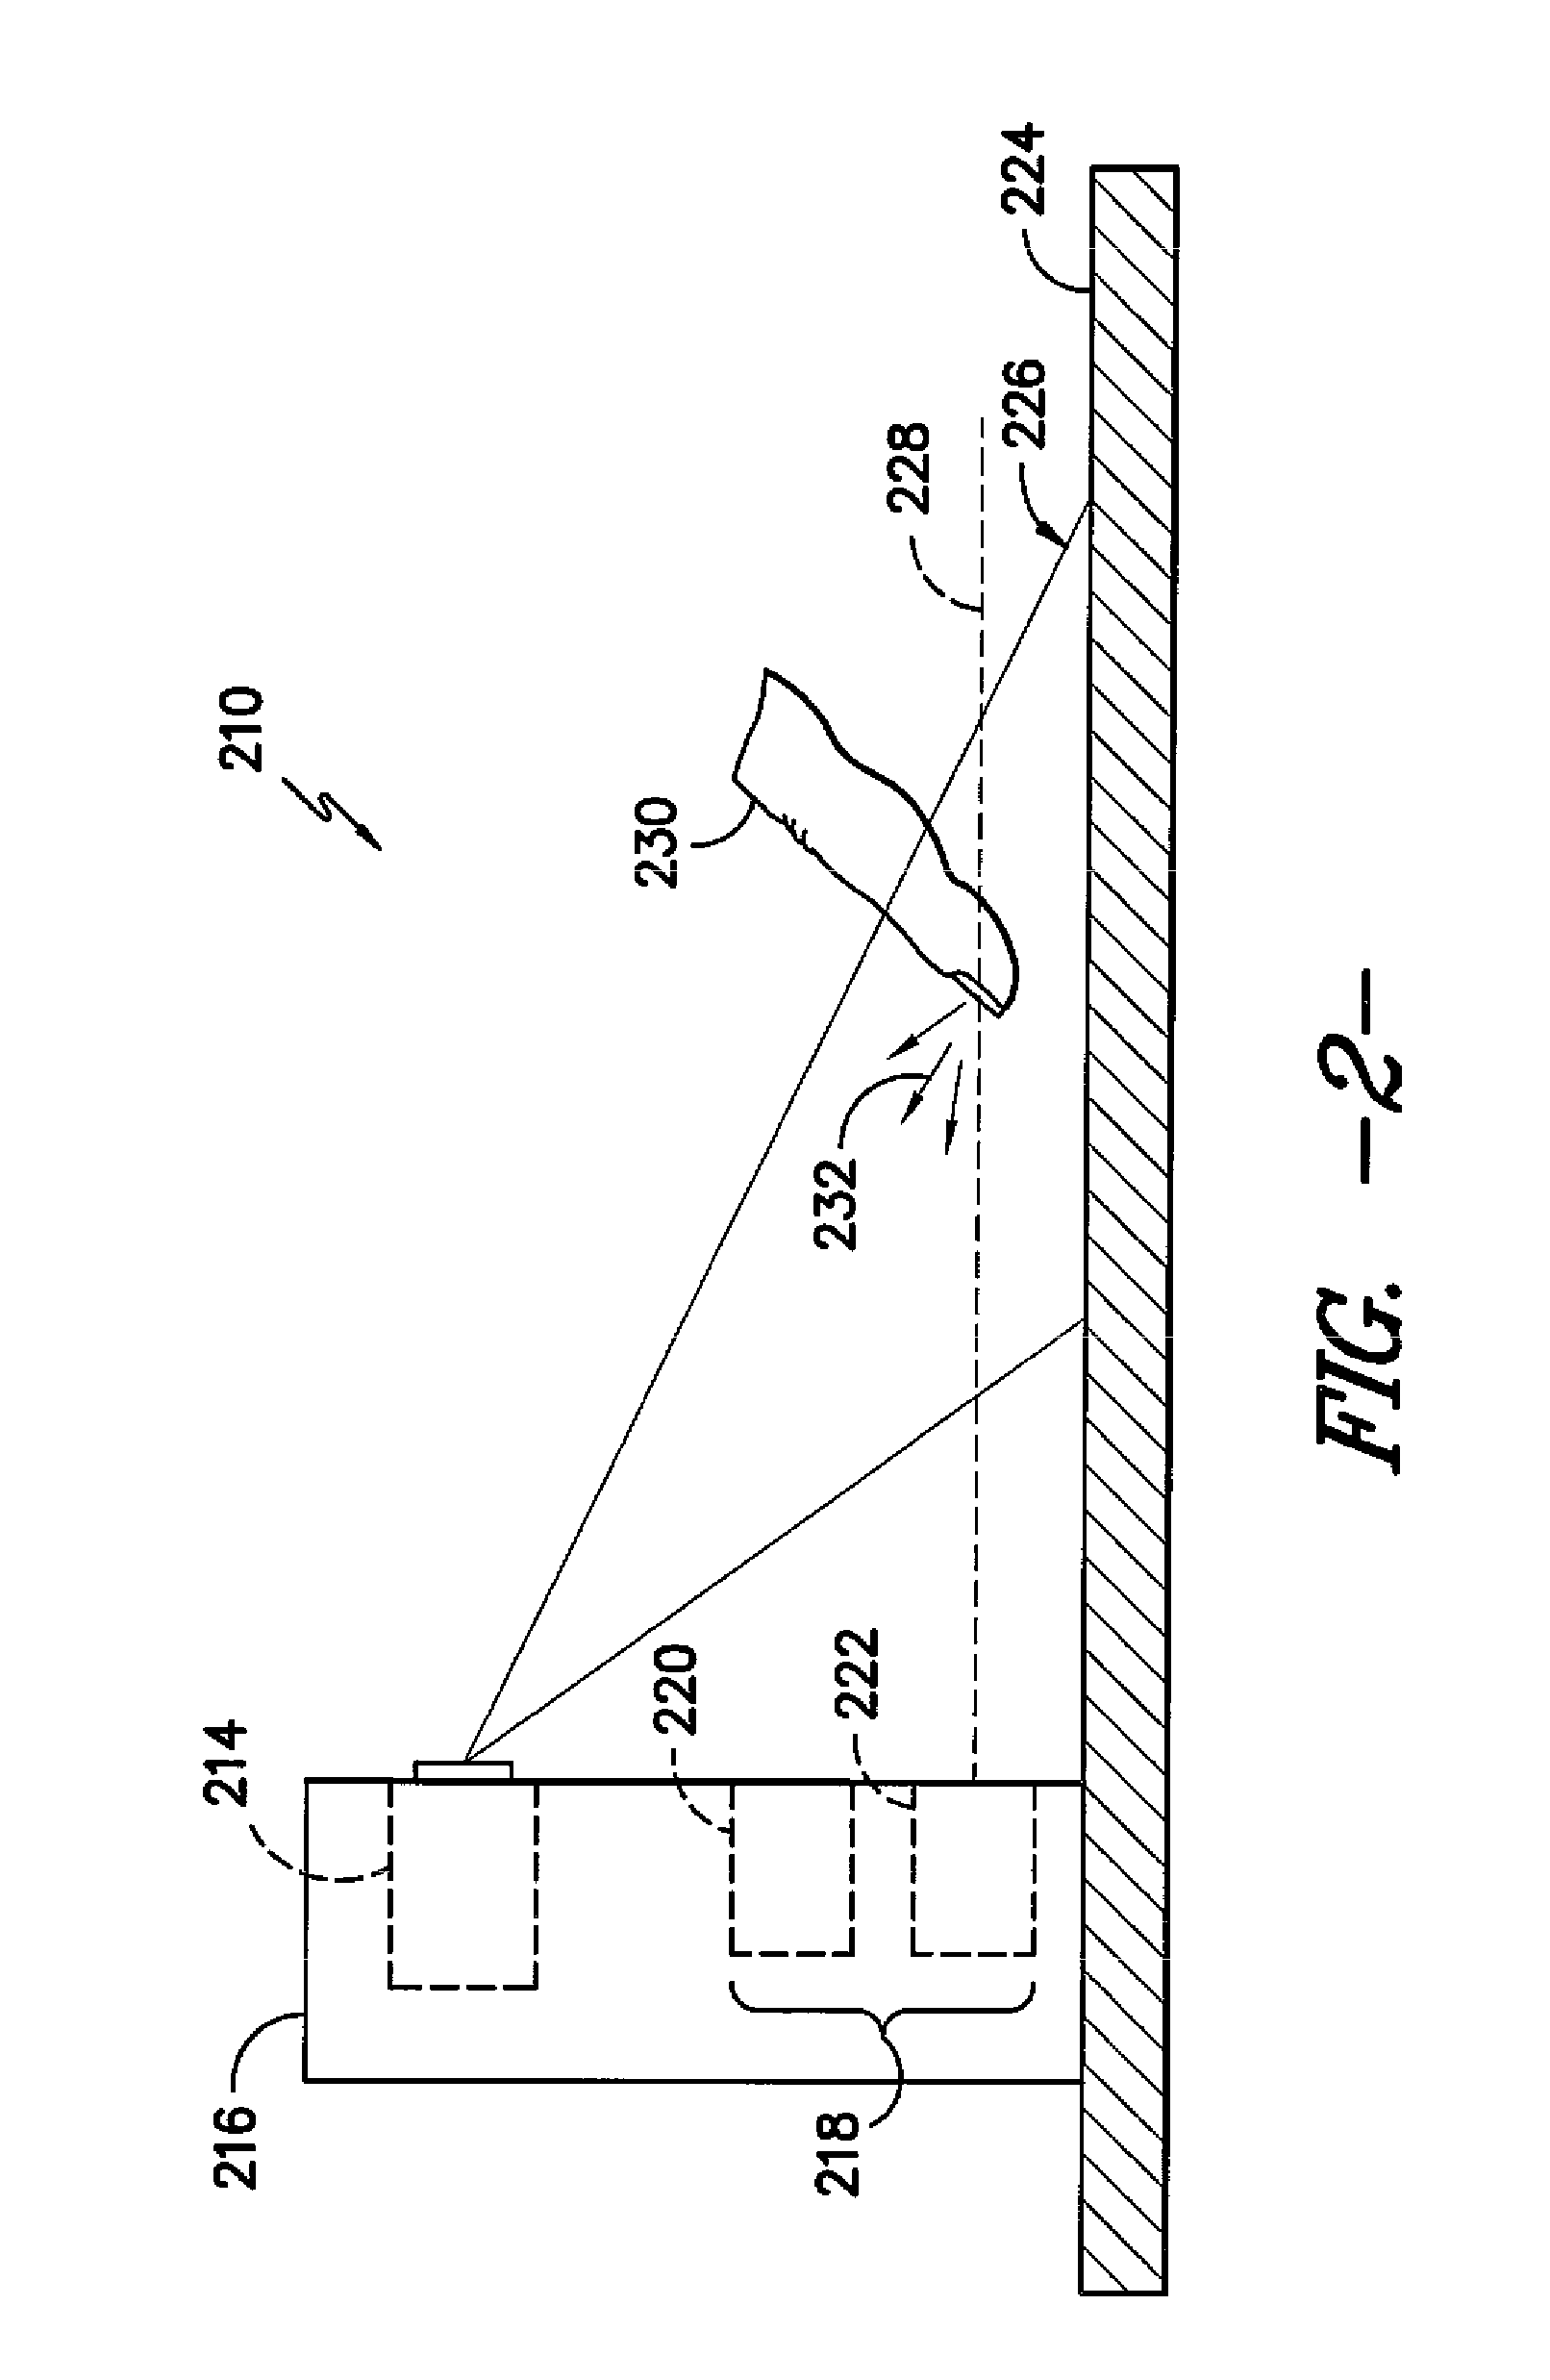 Speech generation device with a projected display and optical inputs